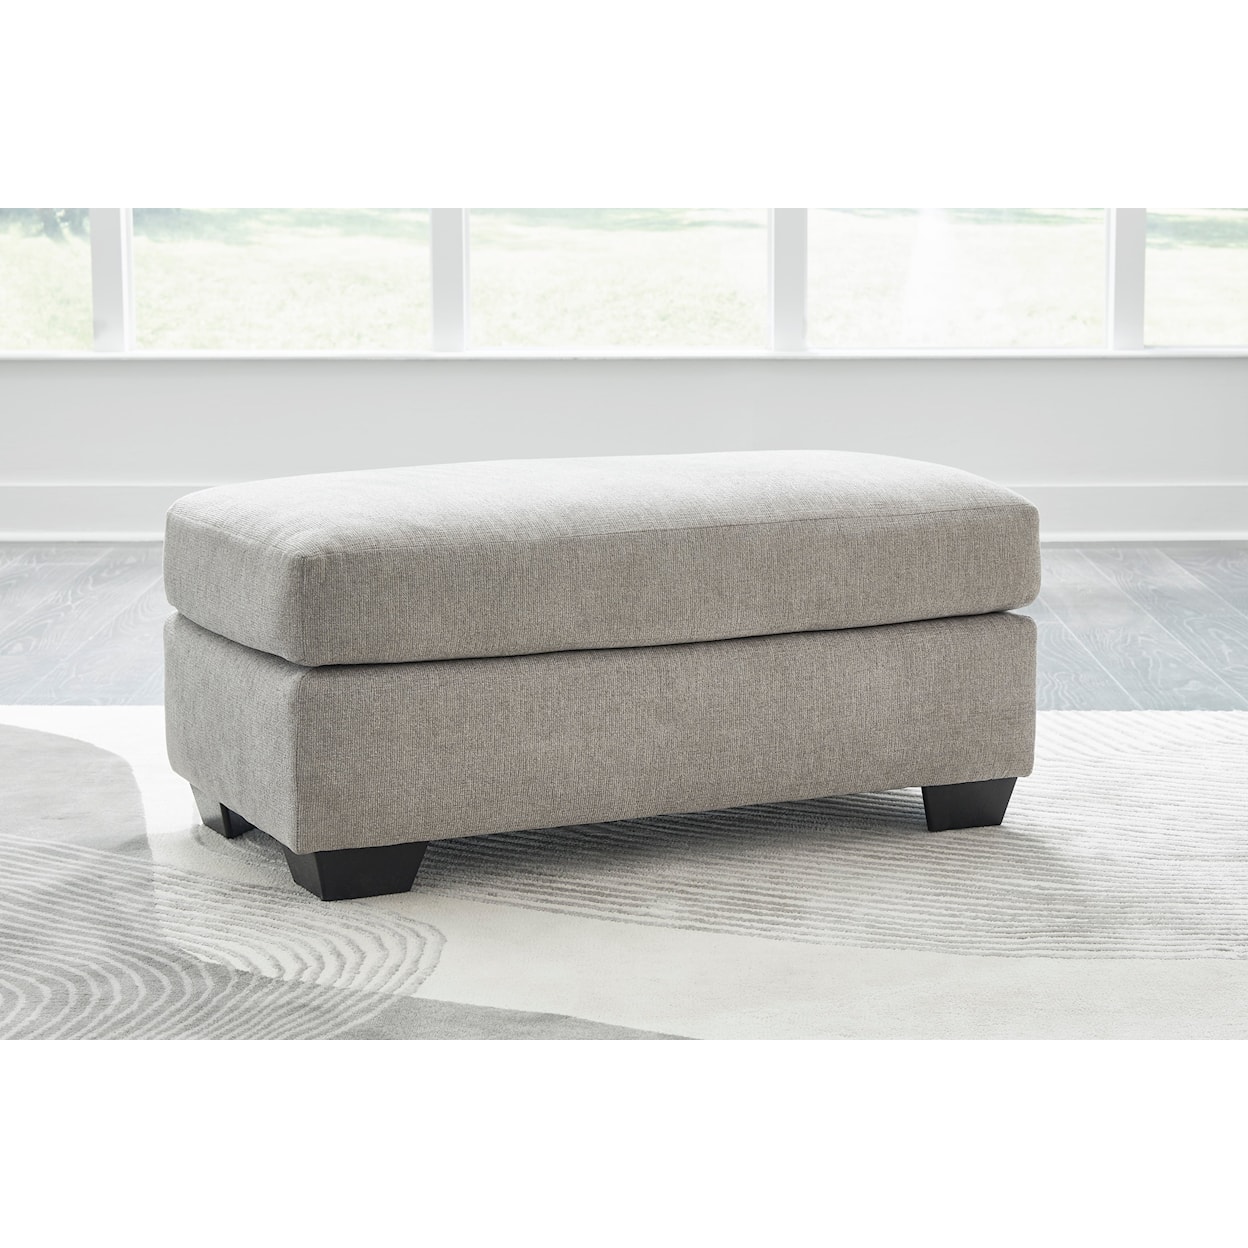 StyleLine Avenal Park Oversized Chair and Ottoman